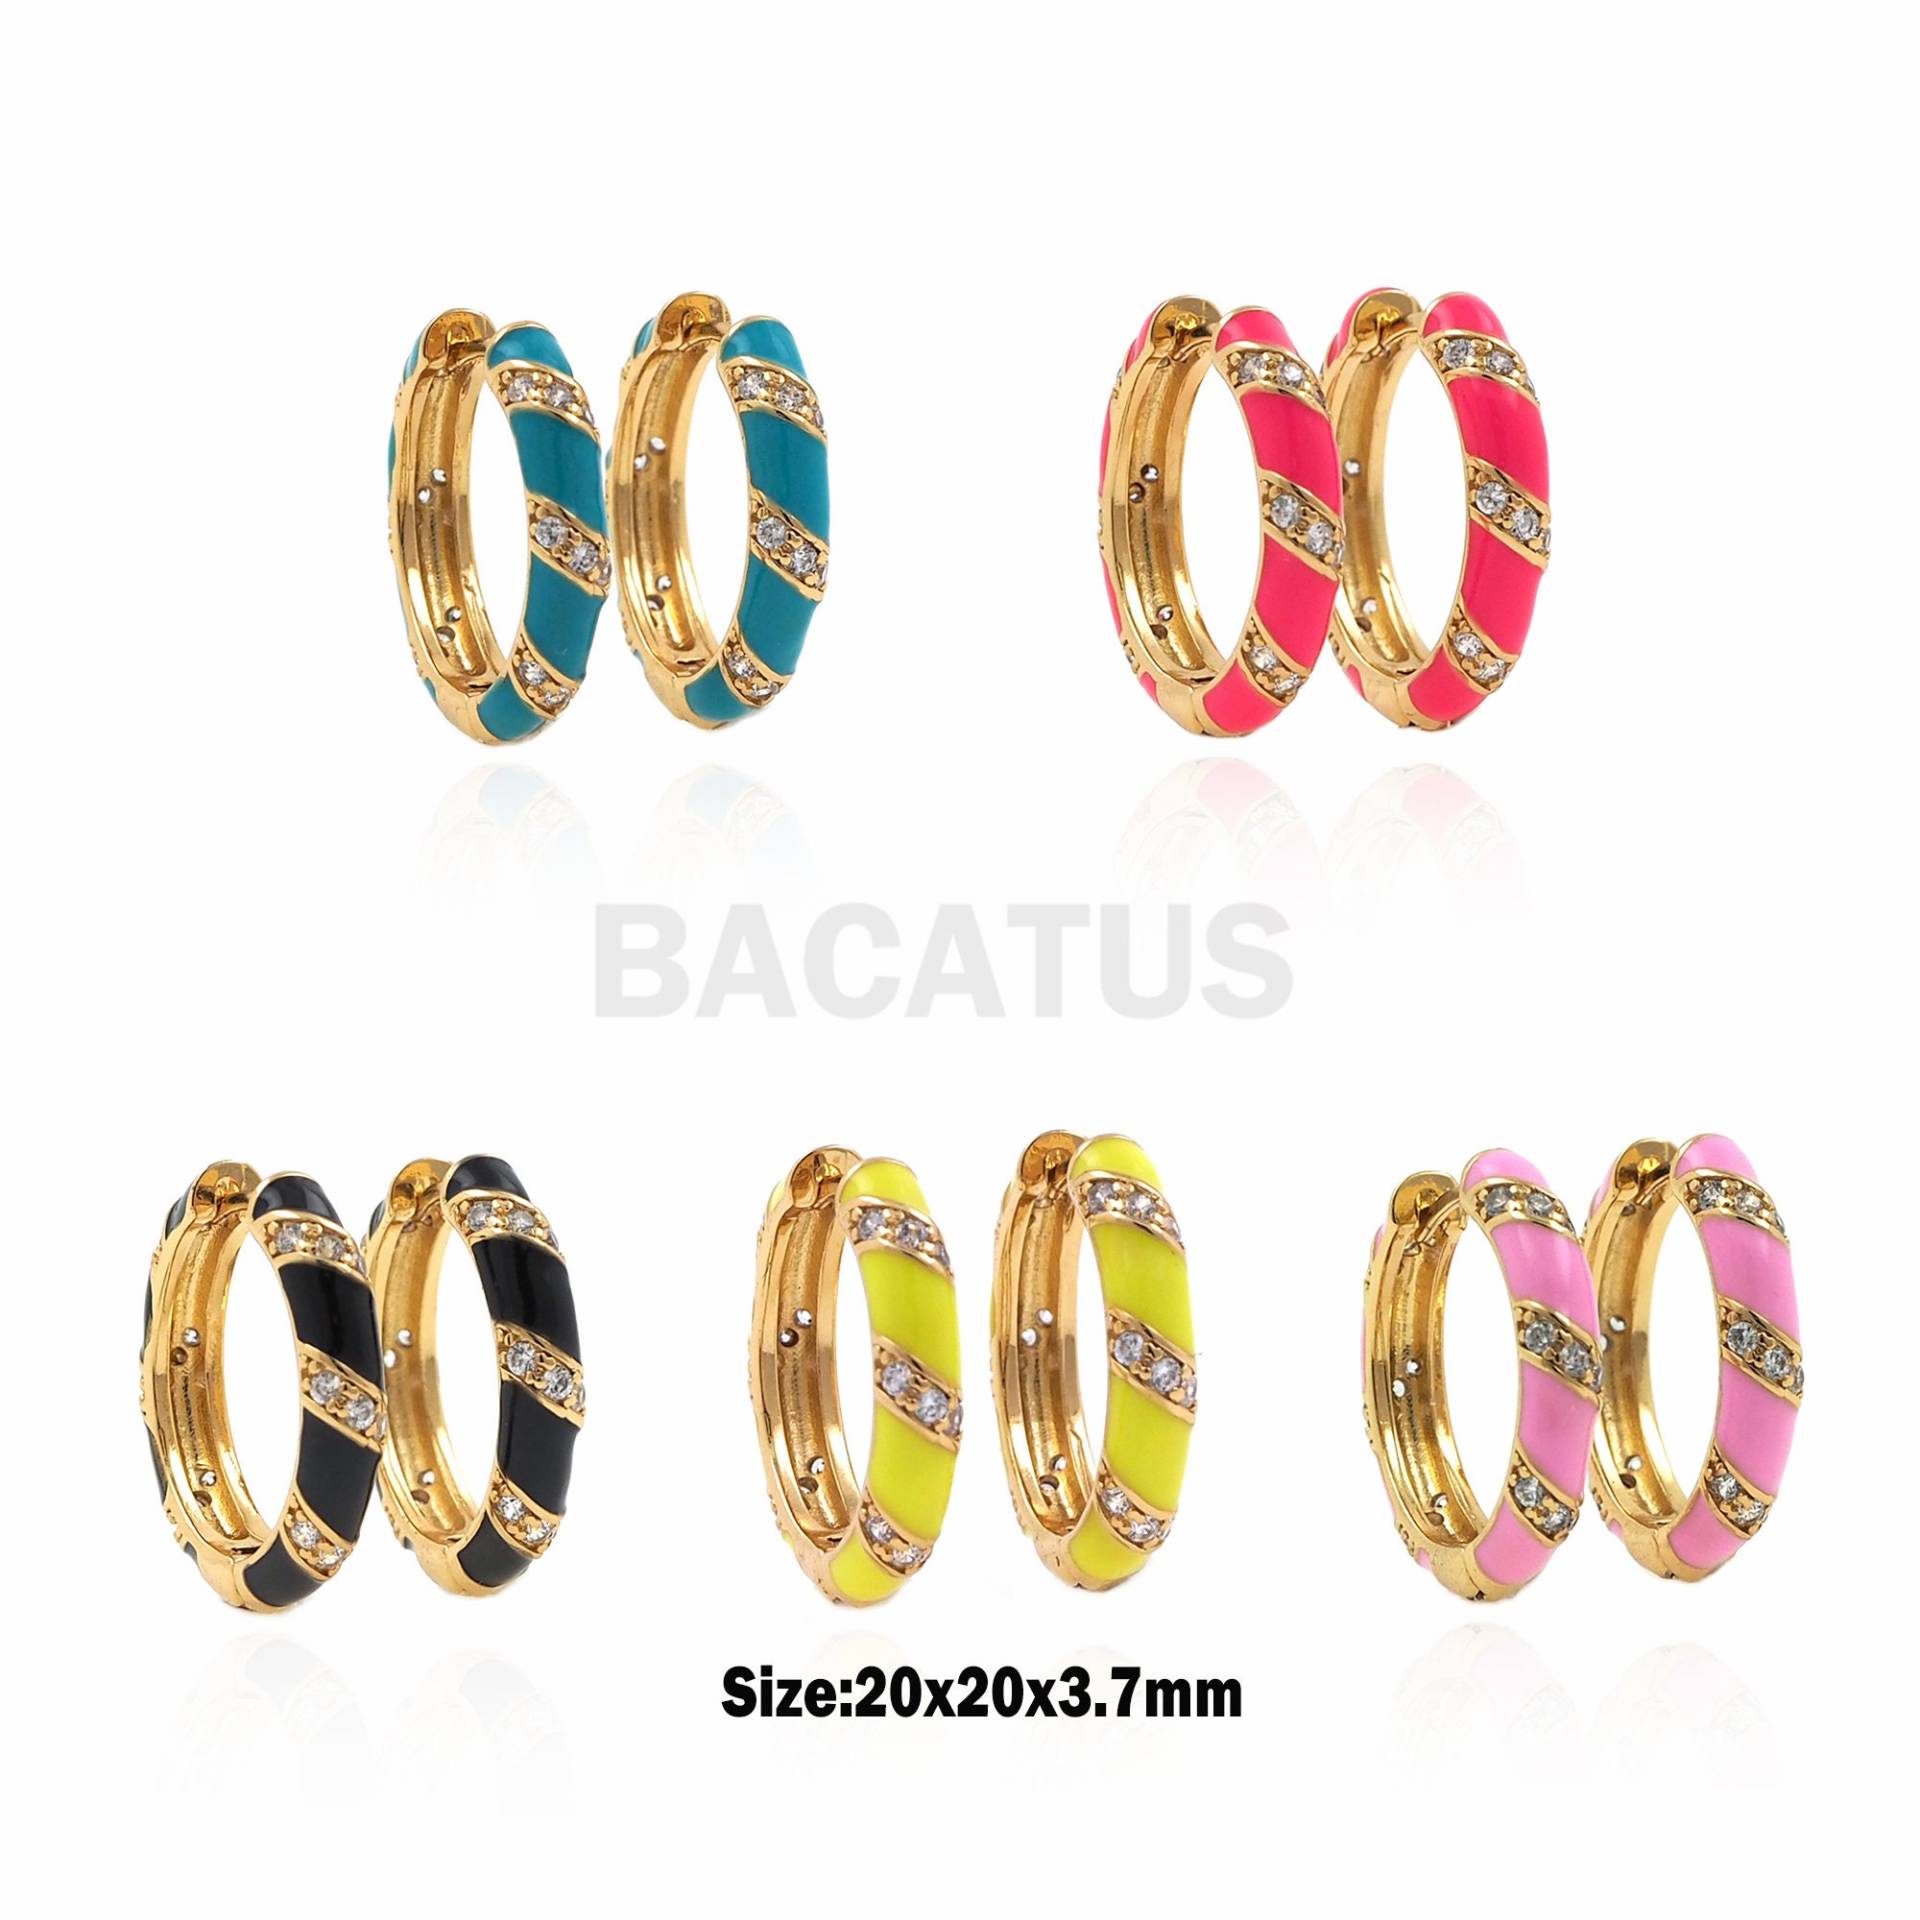 1 Paar, 18K Gold Filled Emaille Runde Ohrringe, Micro-Paved Cz Einfache Multi-Color Optional, 20x20x3, 7mm von BACATUSCR